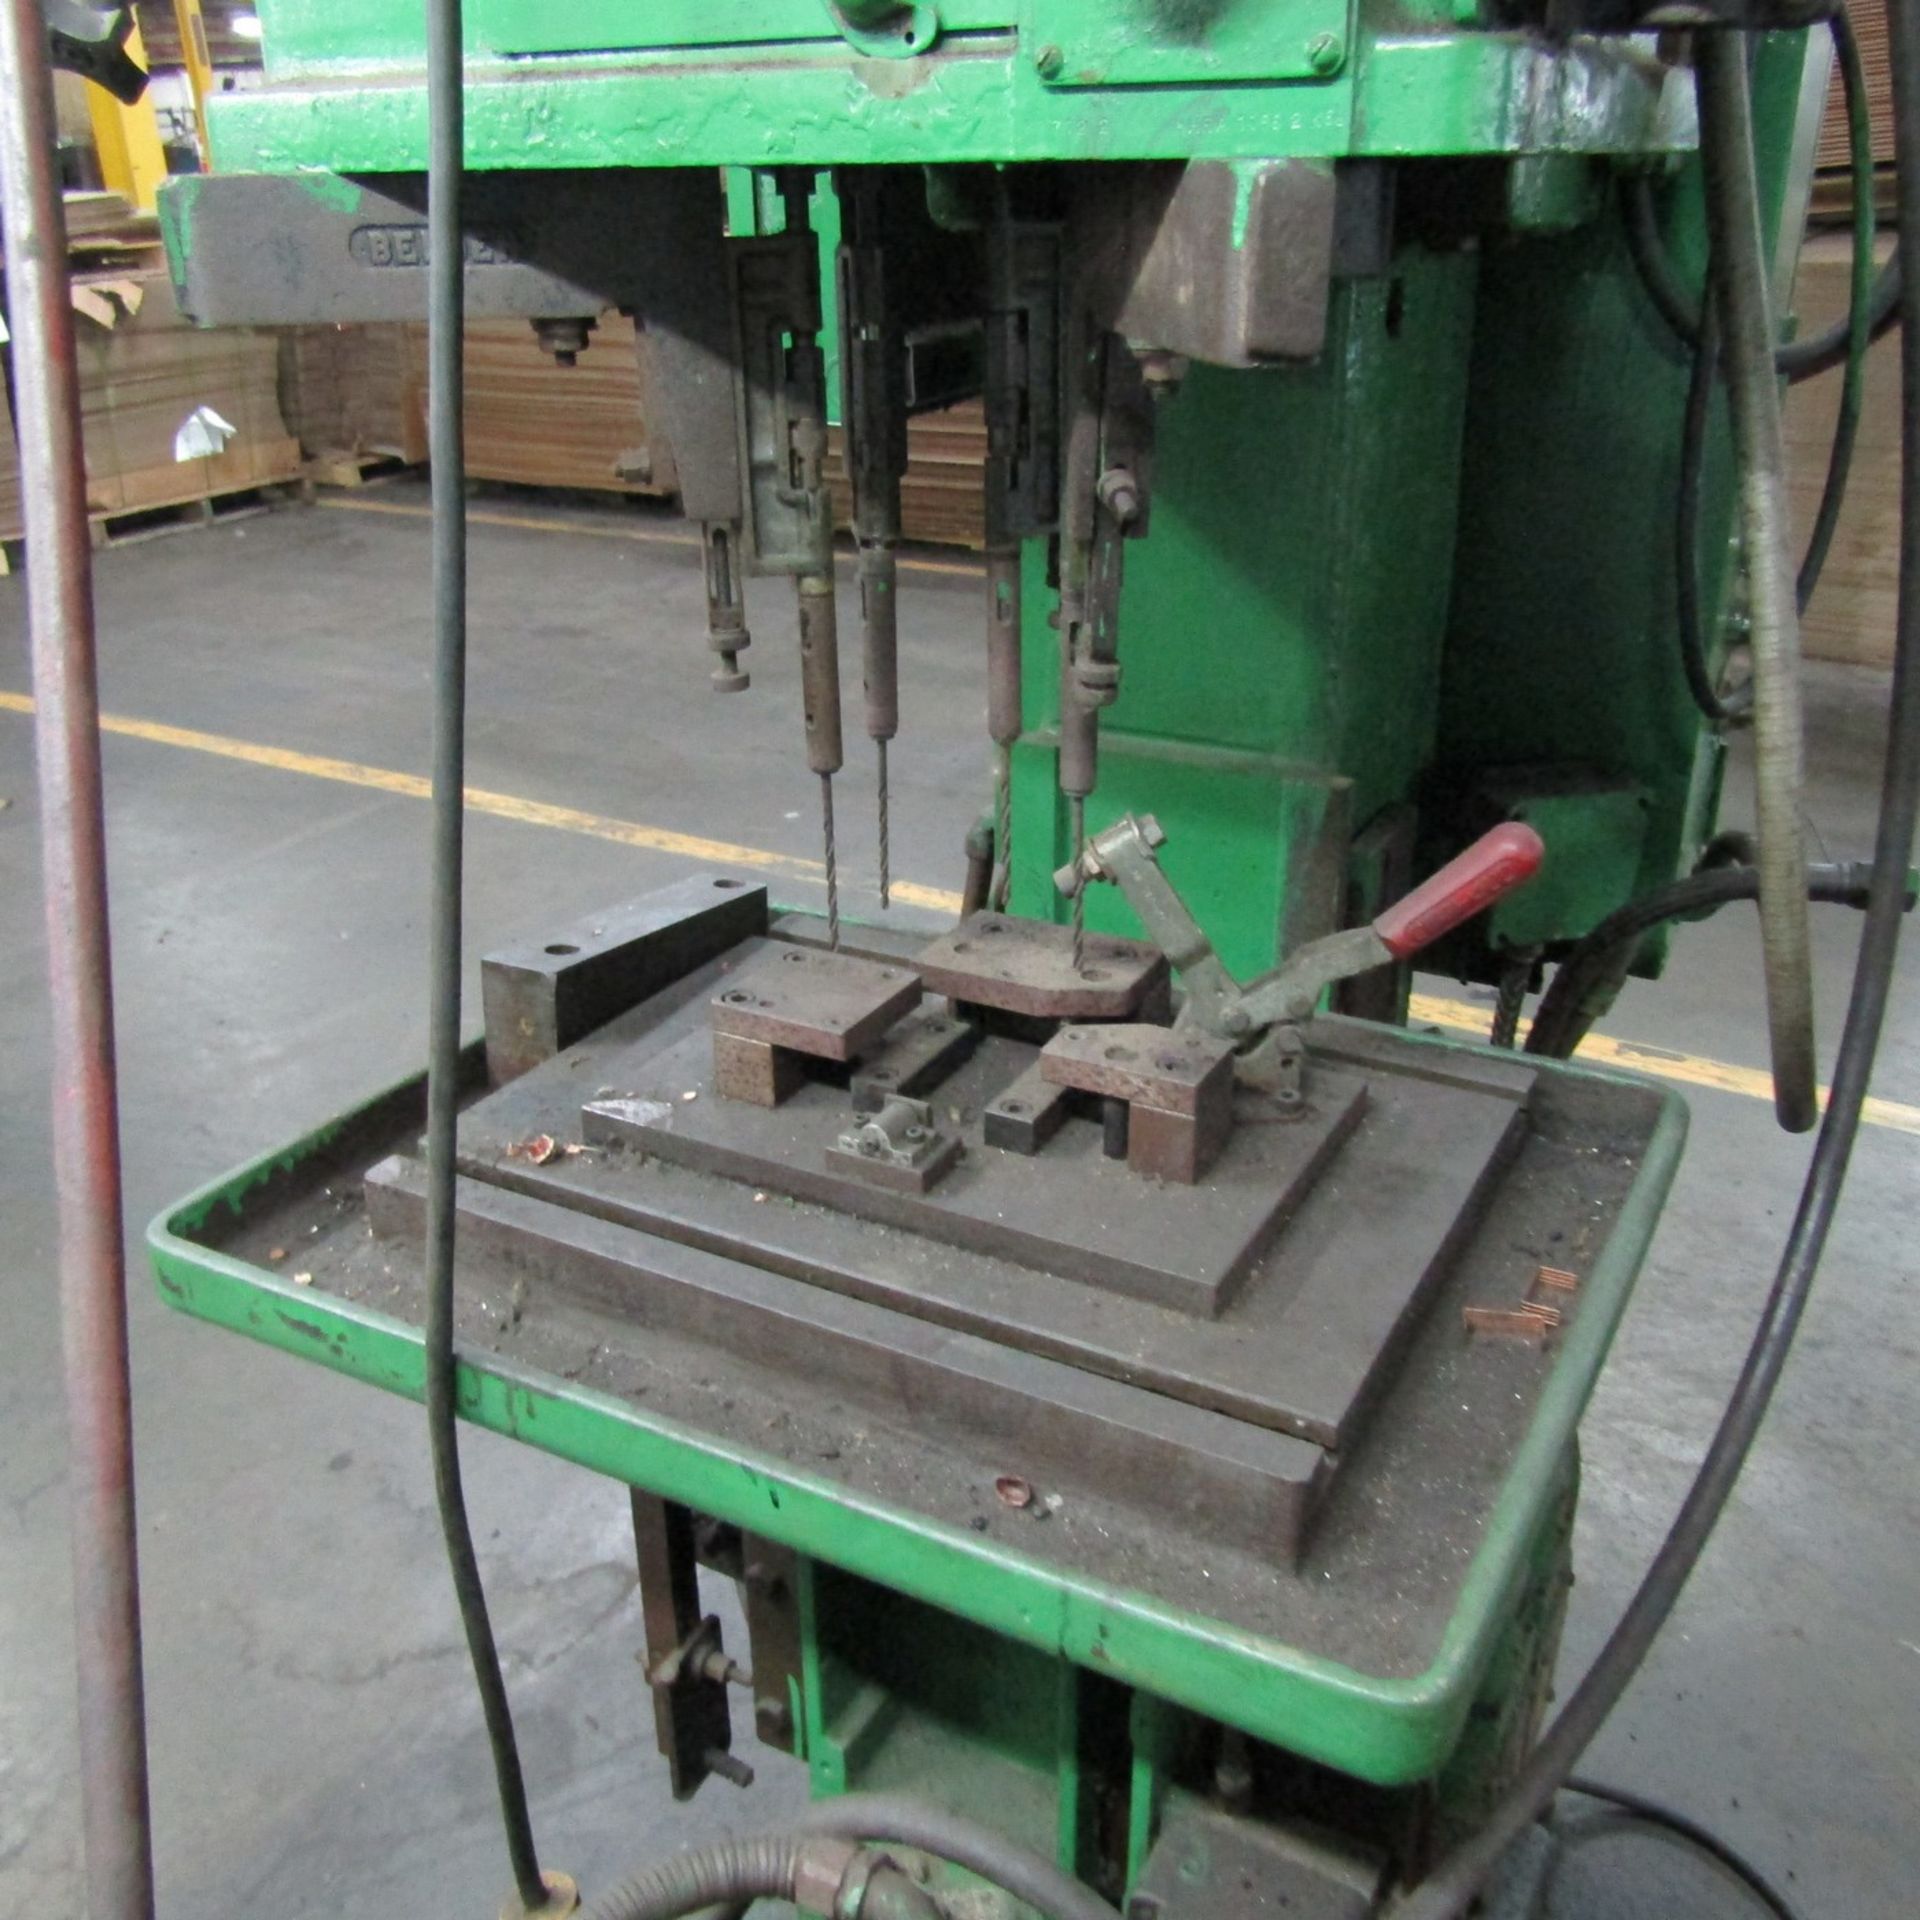 Delta Model HR-712-2 Vertical Production Drill, S/N: HRA 11862 K66; with 4-Spindle Drill Head, - Image 3 of 7